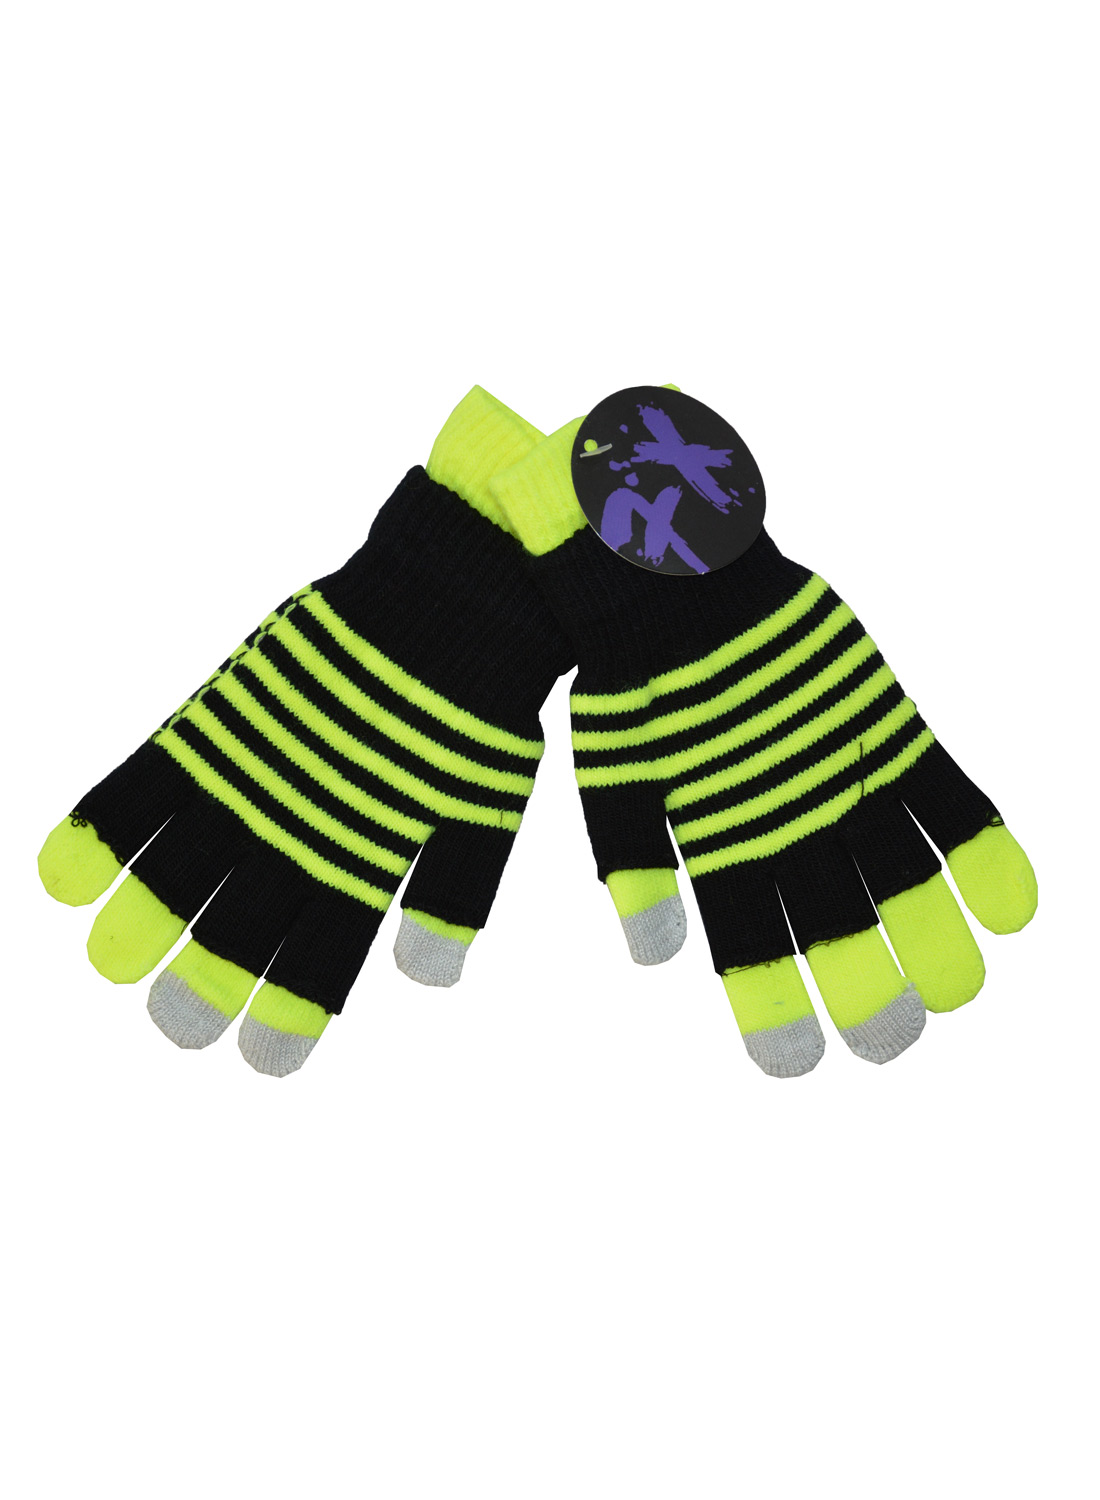 Double Black & Neon Yellow Striped Gloves